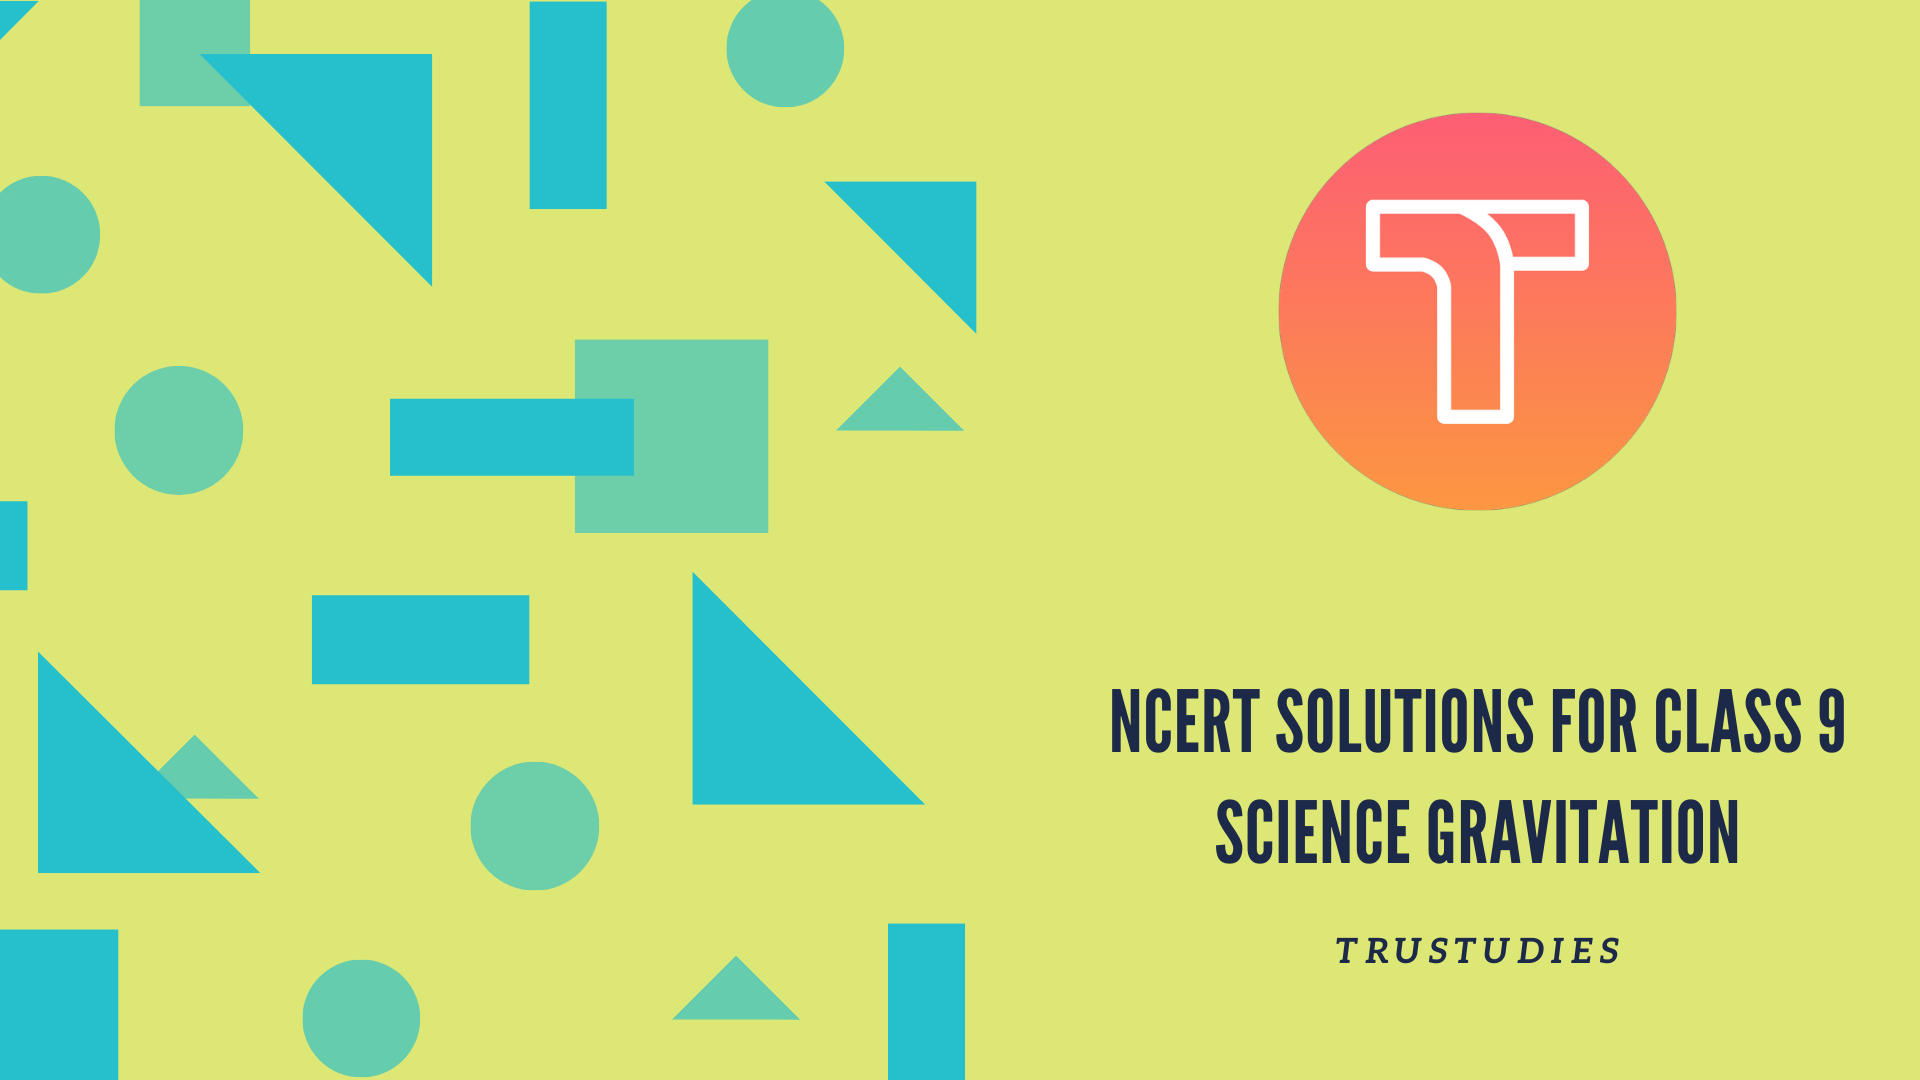 NCERT solutions for class 9 science chapter 10 gravitation banner image